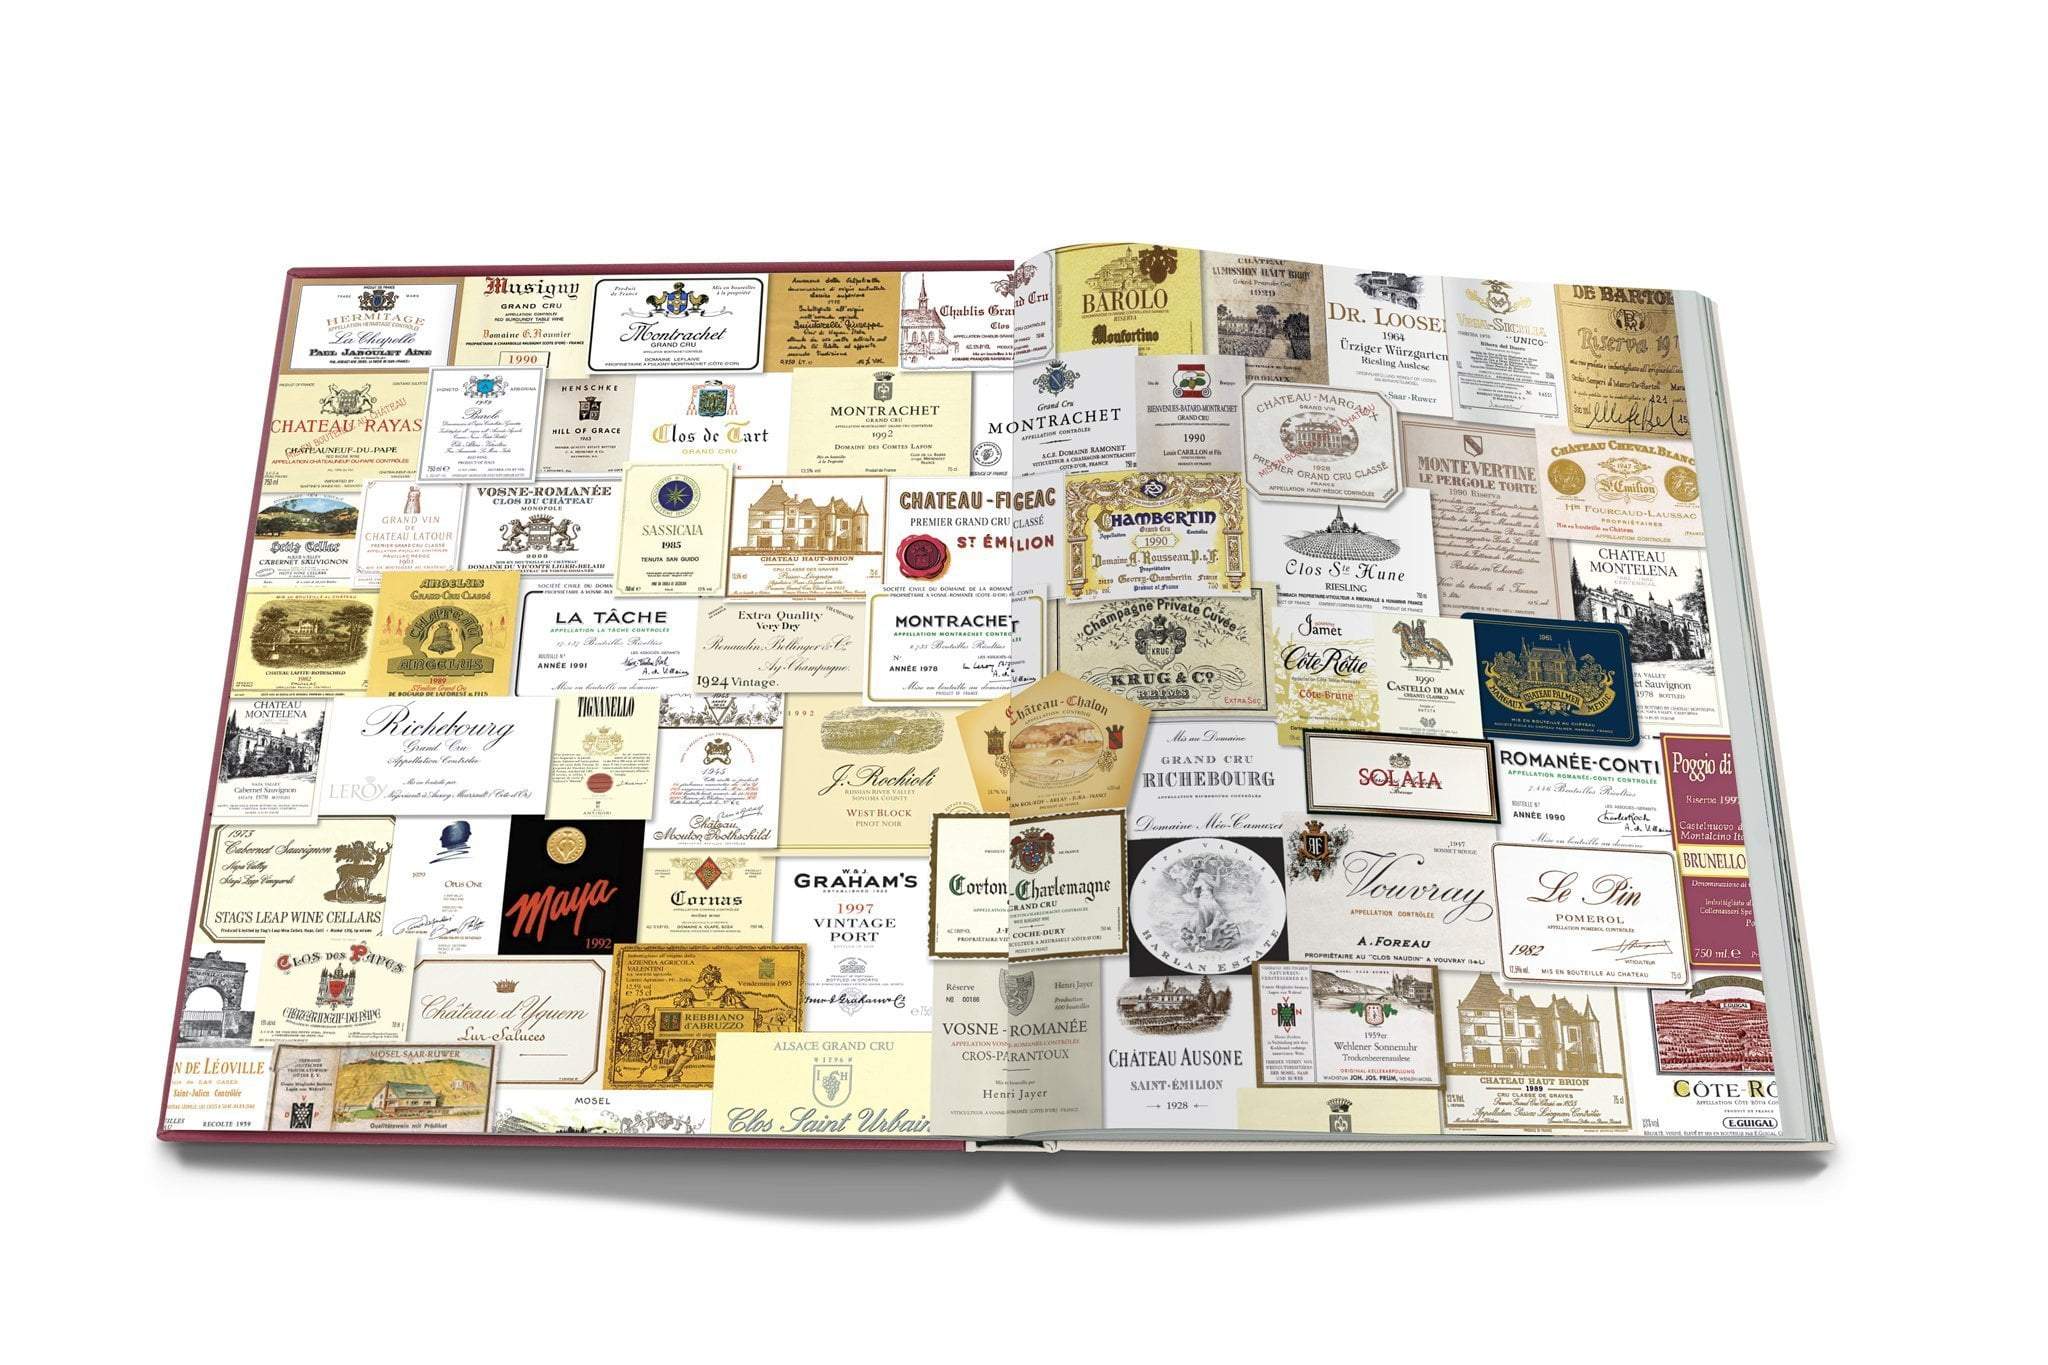 Assouline - The Impossible Collection of Wine - Sofabordsbog 